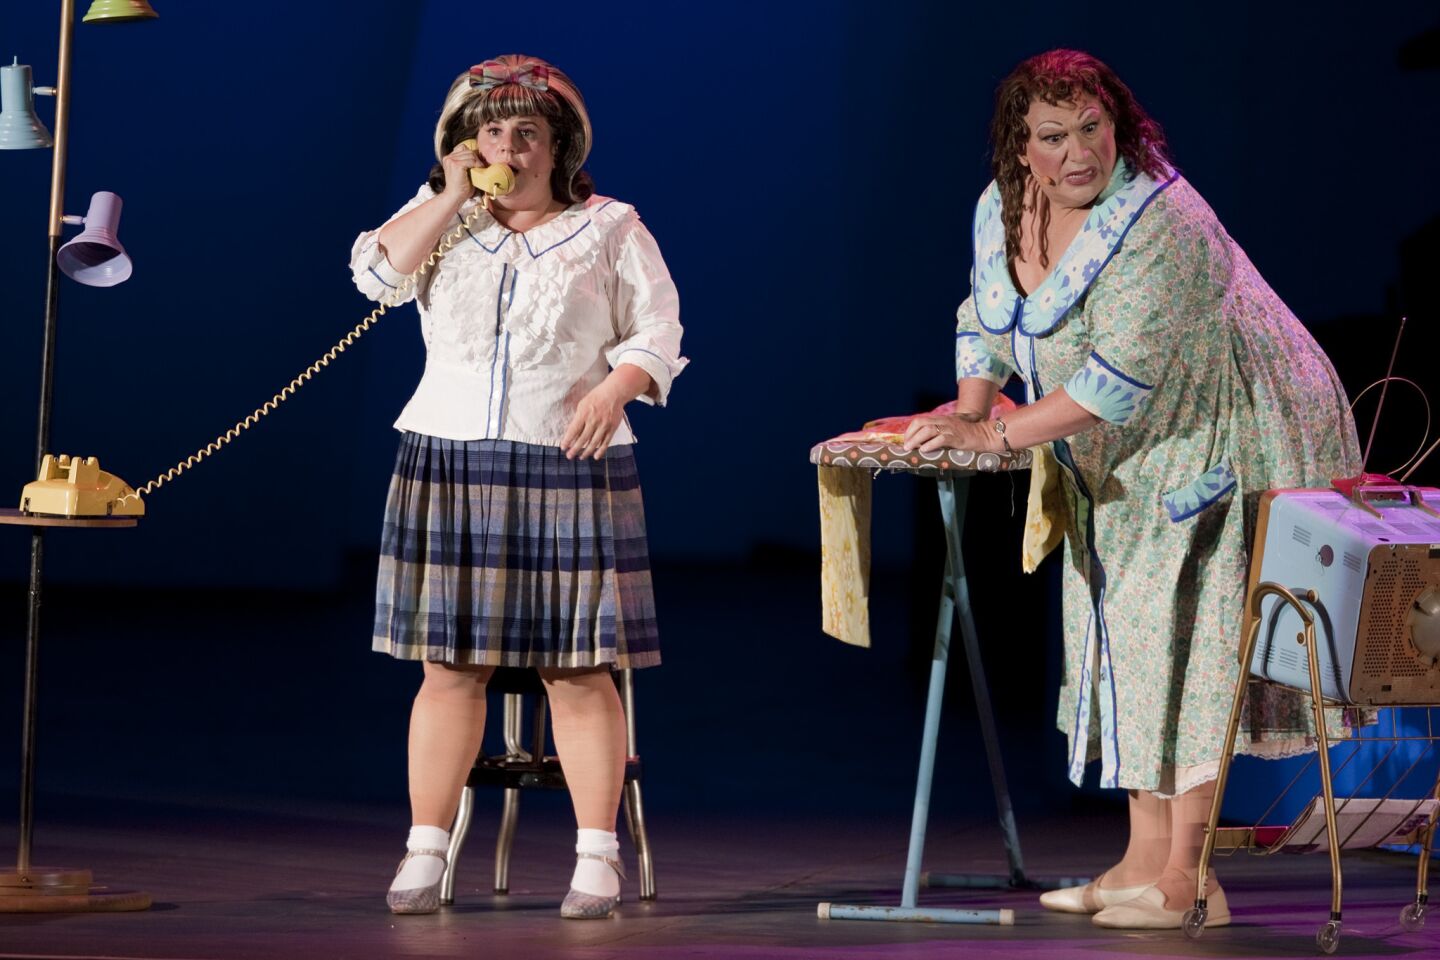 "Hairspray," set in 1962 Baltimore, follows "pleasantly plump" teen Tracy Turnblad's quest to dance on the "Corny Collins Show." Based on John Waters' 1988 film, "Hairspray" ran on Broadway from 2002 to 2009 and grossed more than $252 million. In 2007, the musical was adapted into a film.